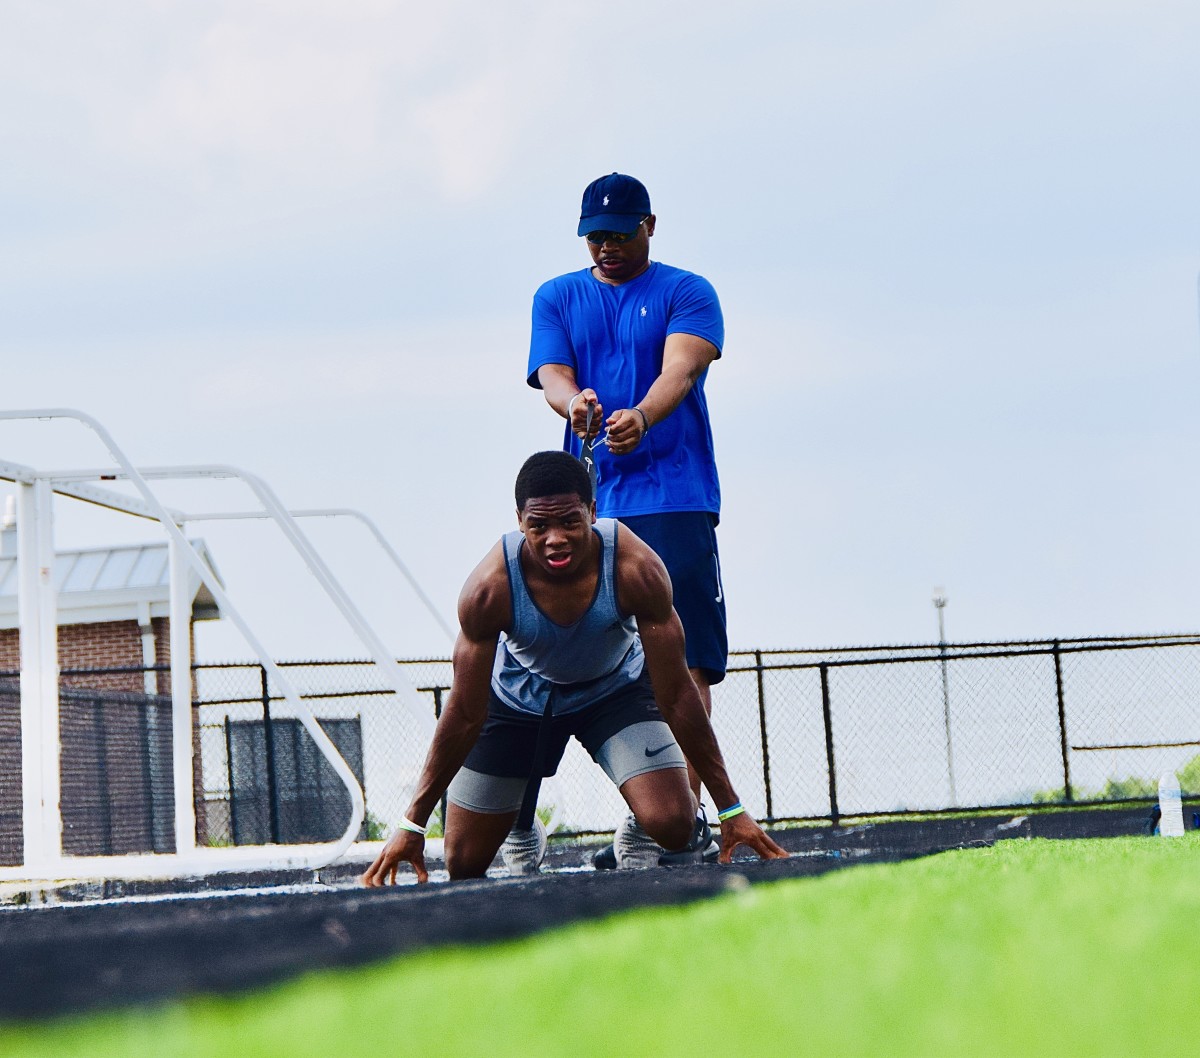 Jaden and his dad, Jeroid, during their track workout